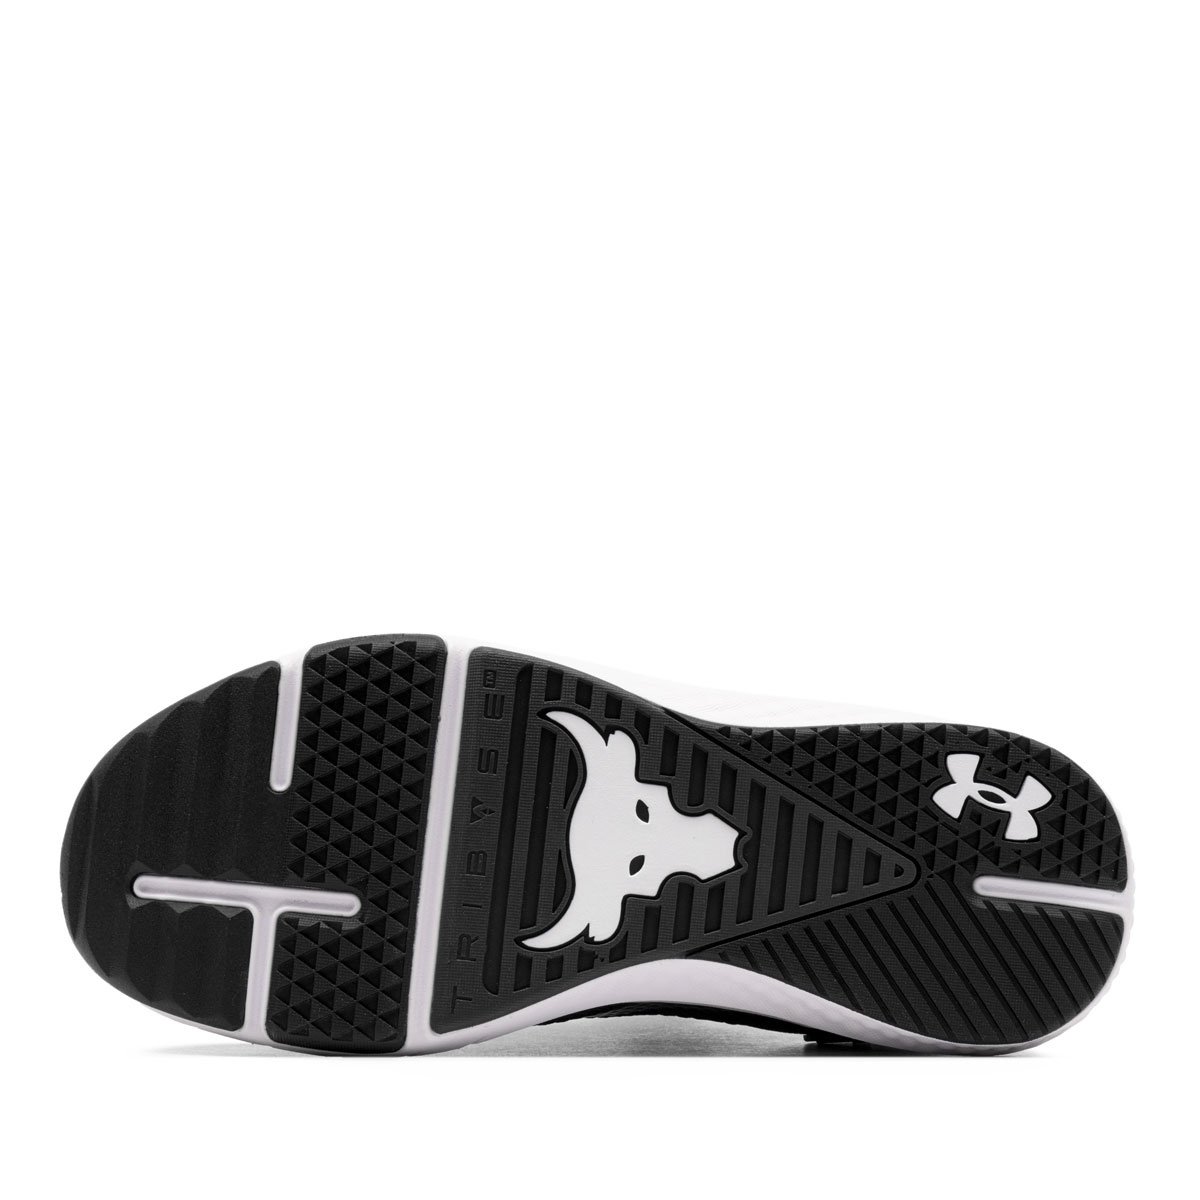 Under Armour Project Rock BSR 3 Мъжки маратонки 3026462-001